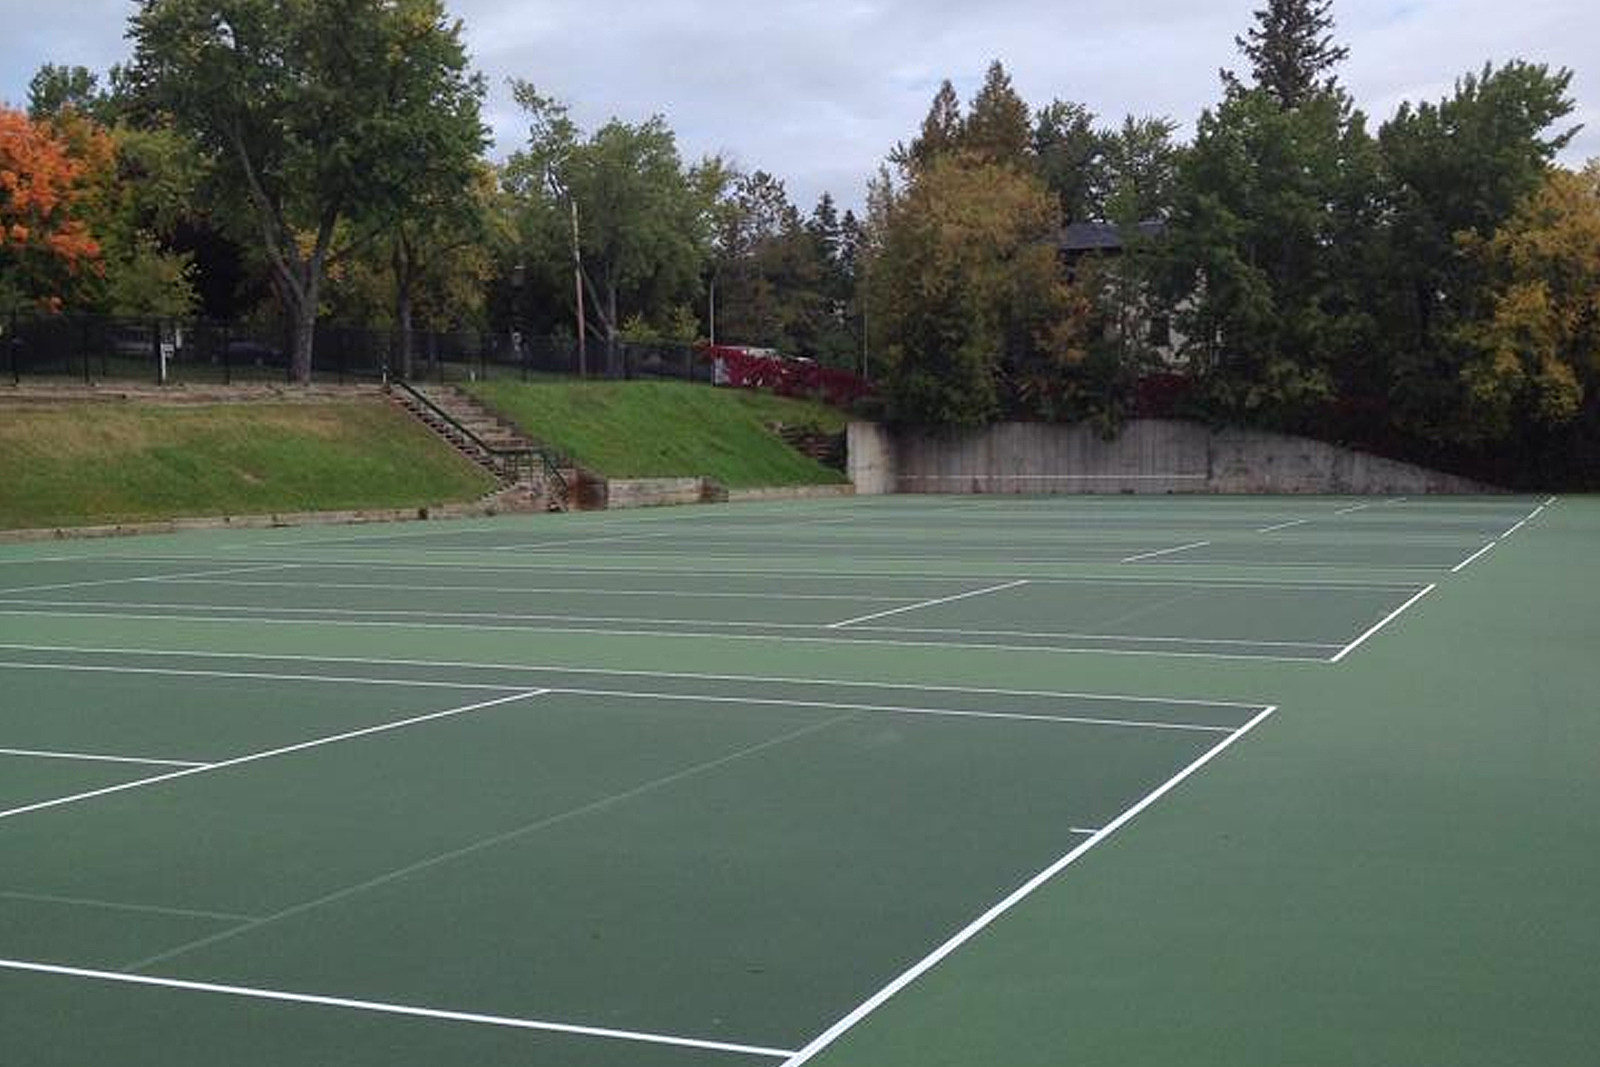 Tennis Courts Available To The Public In the Duluth Superior Area